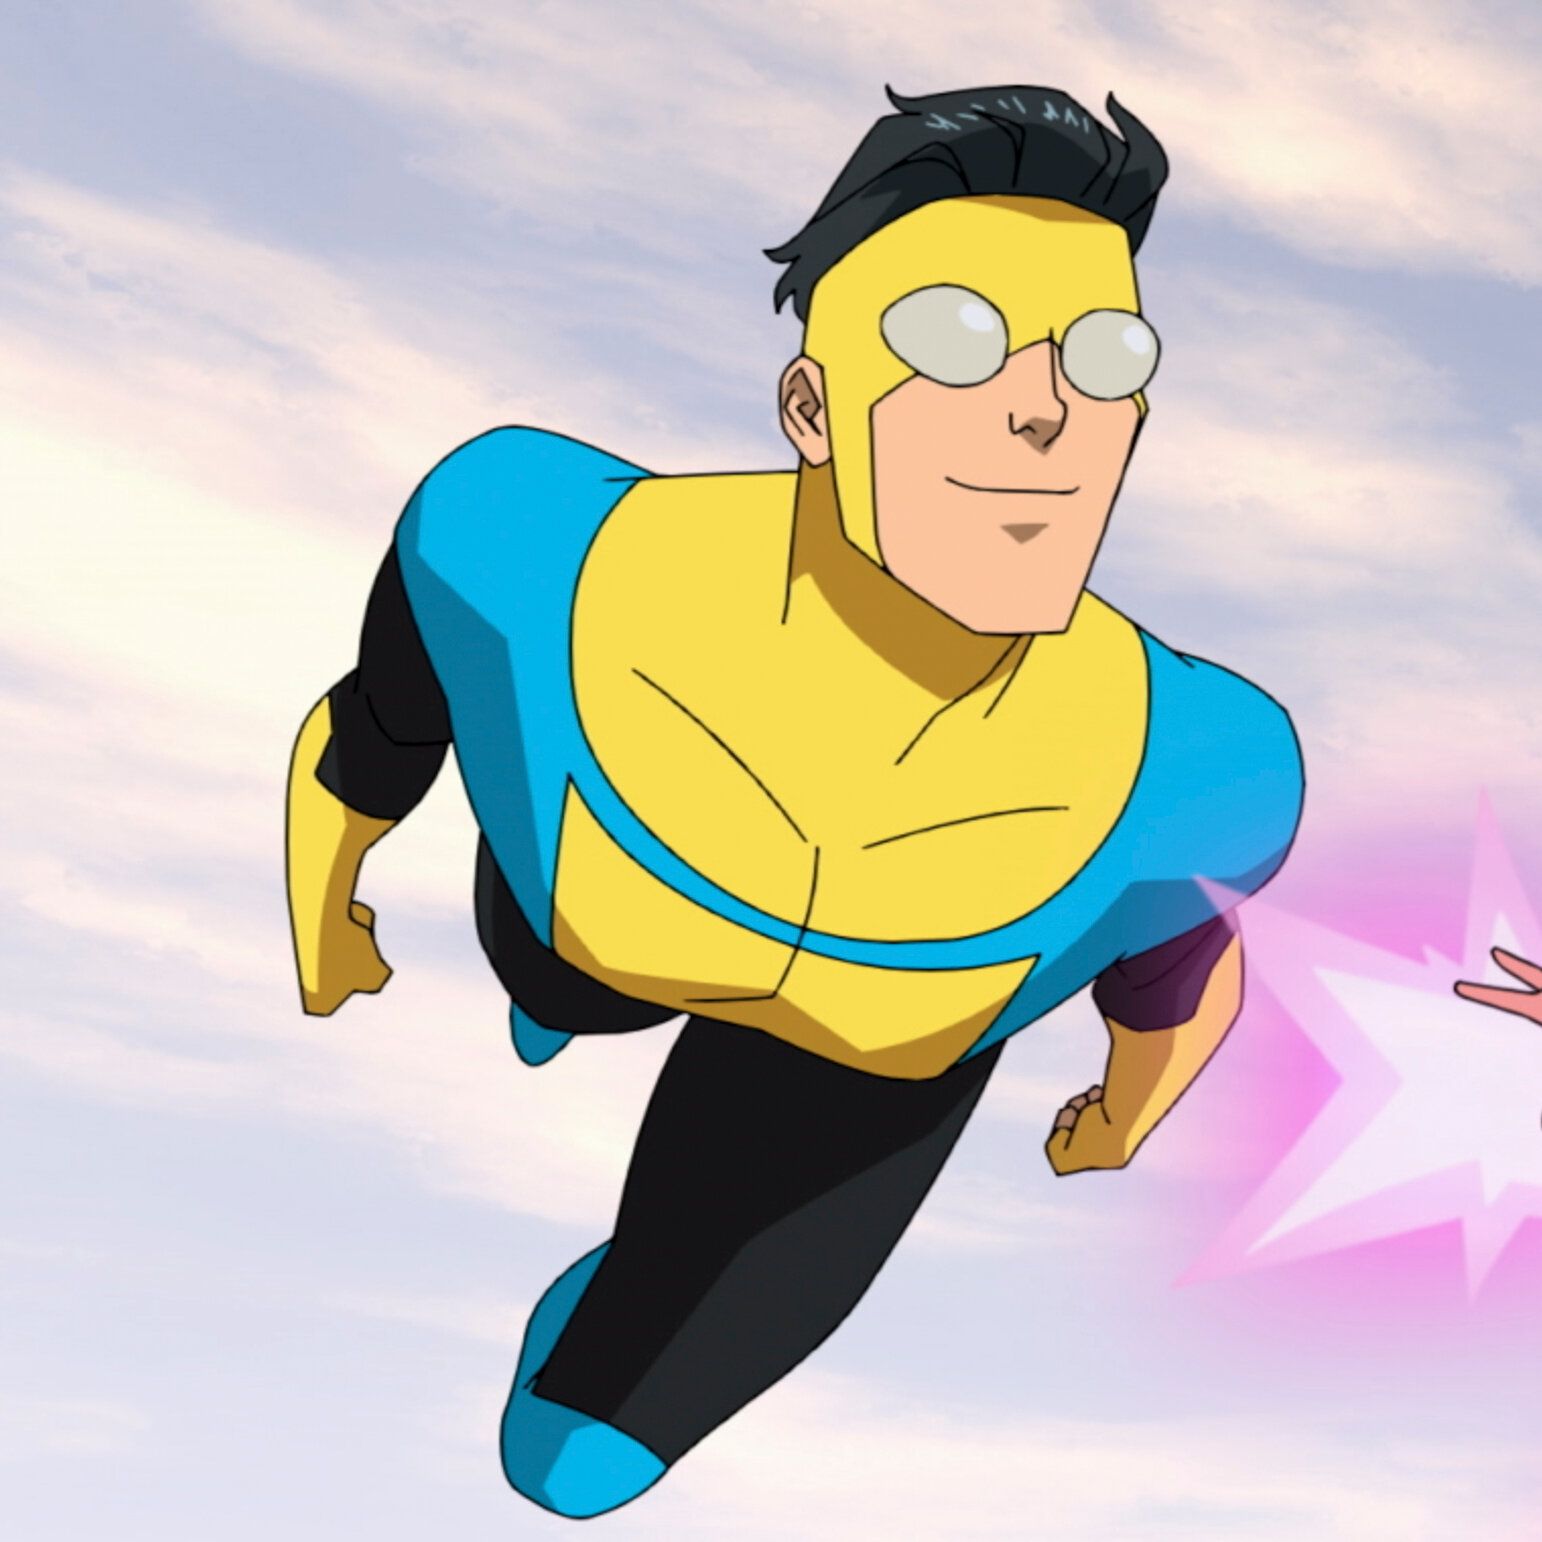 Invincible' Arrives on Amazon Prime With a Young Hero for Mature Audiences